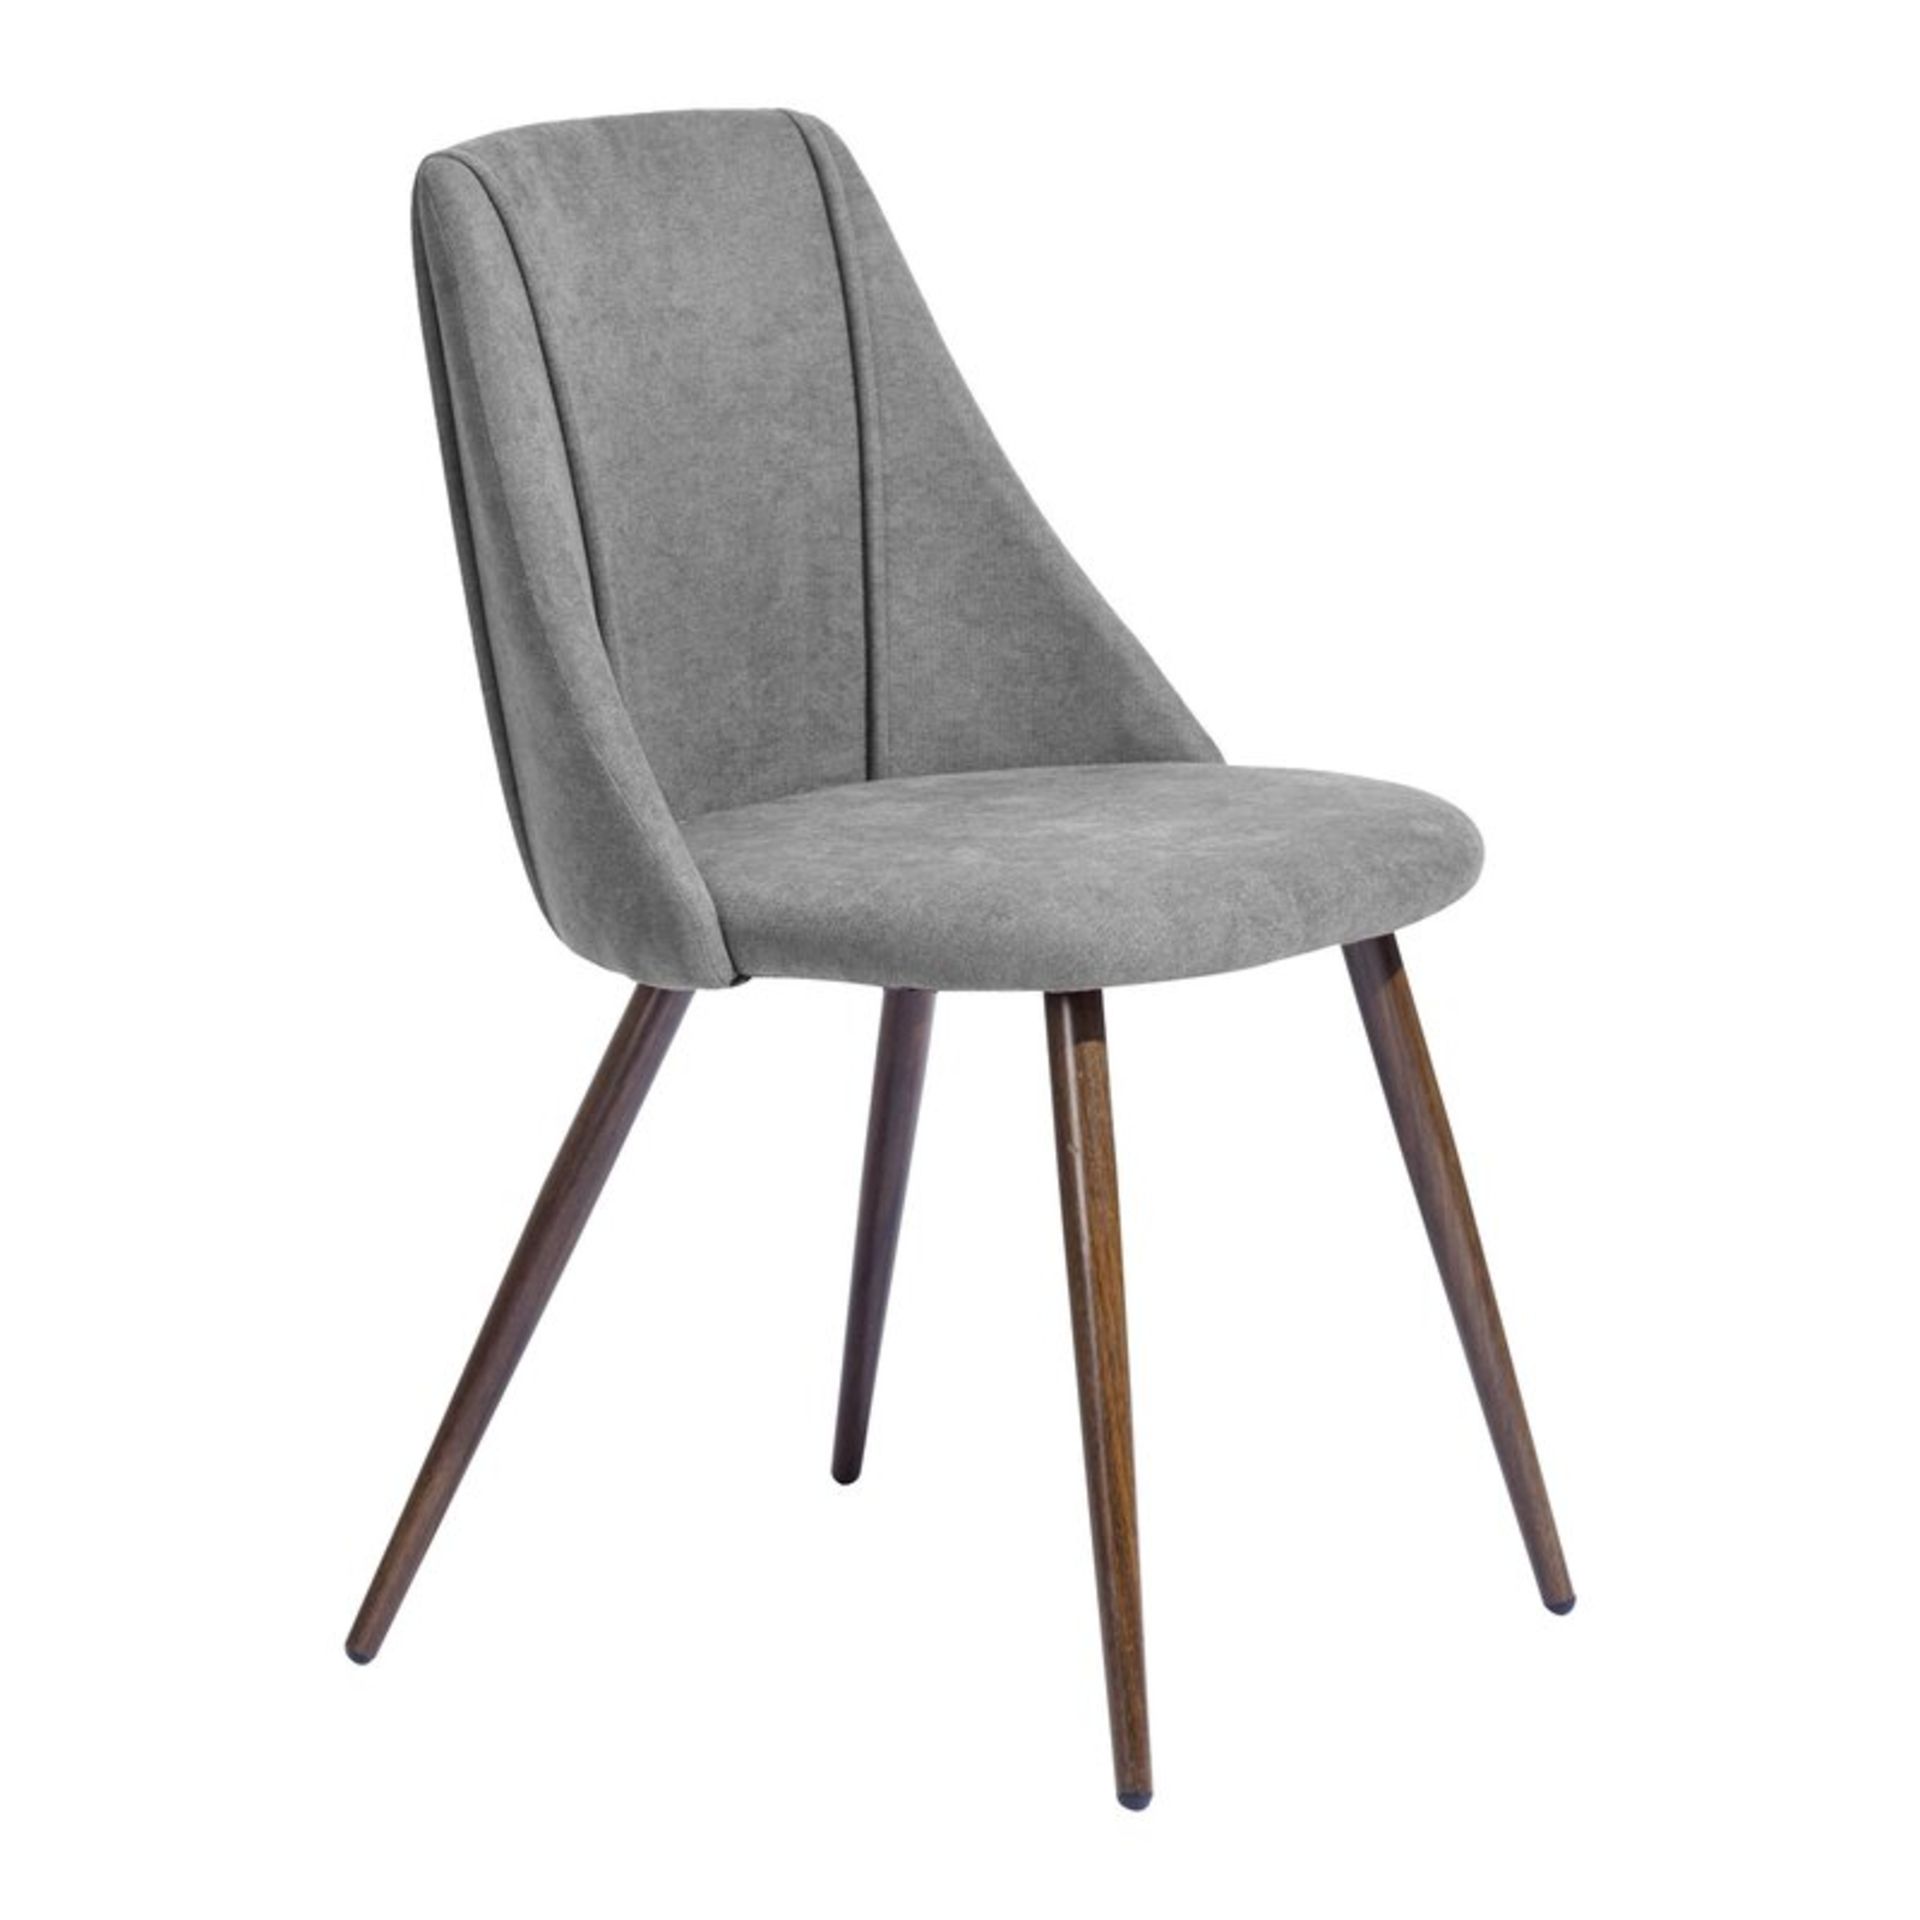 Ahmed Upholstered Side Chair RRP £75.00 (SET OF 2)